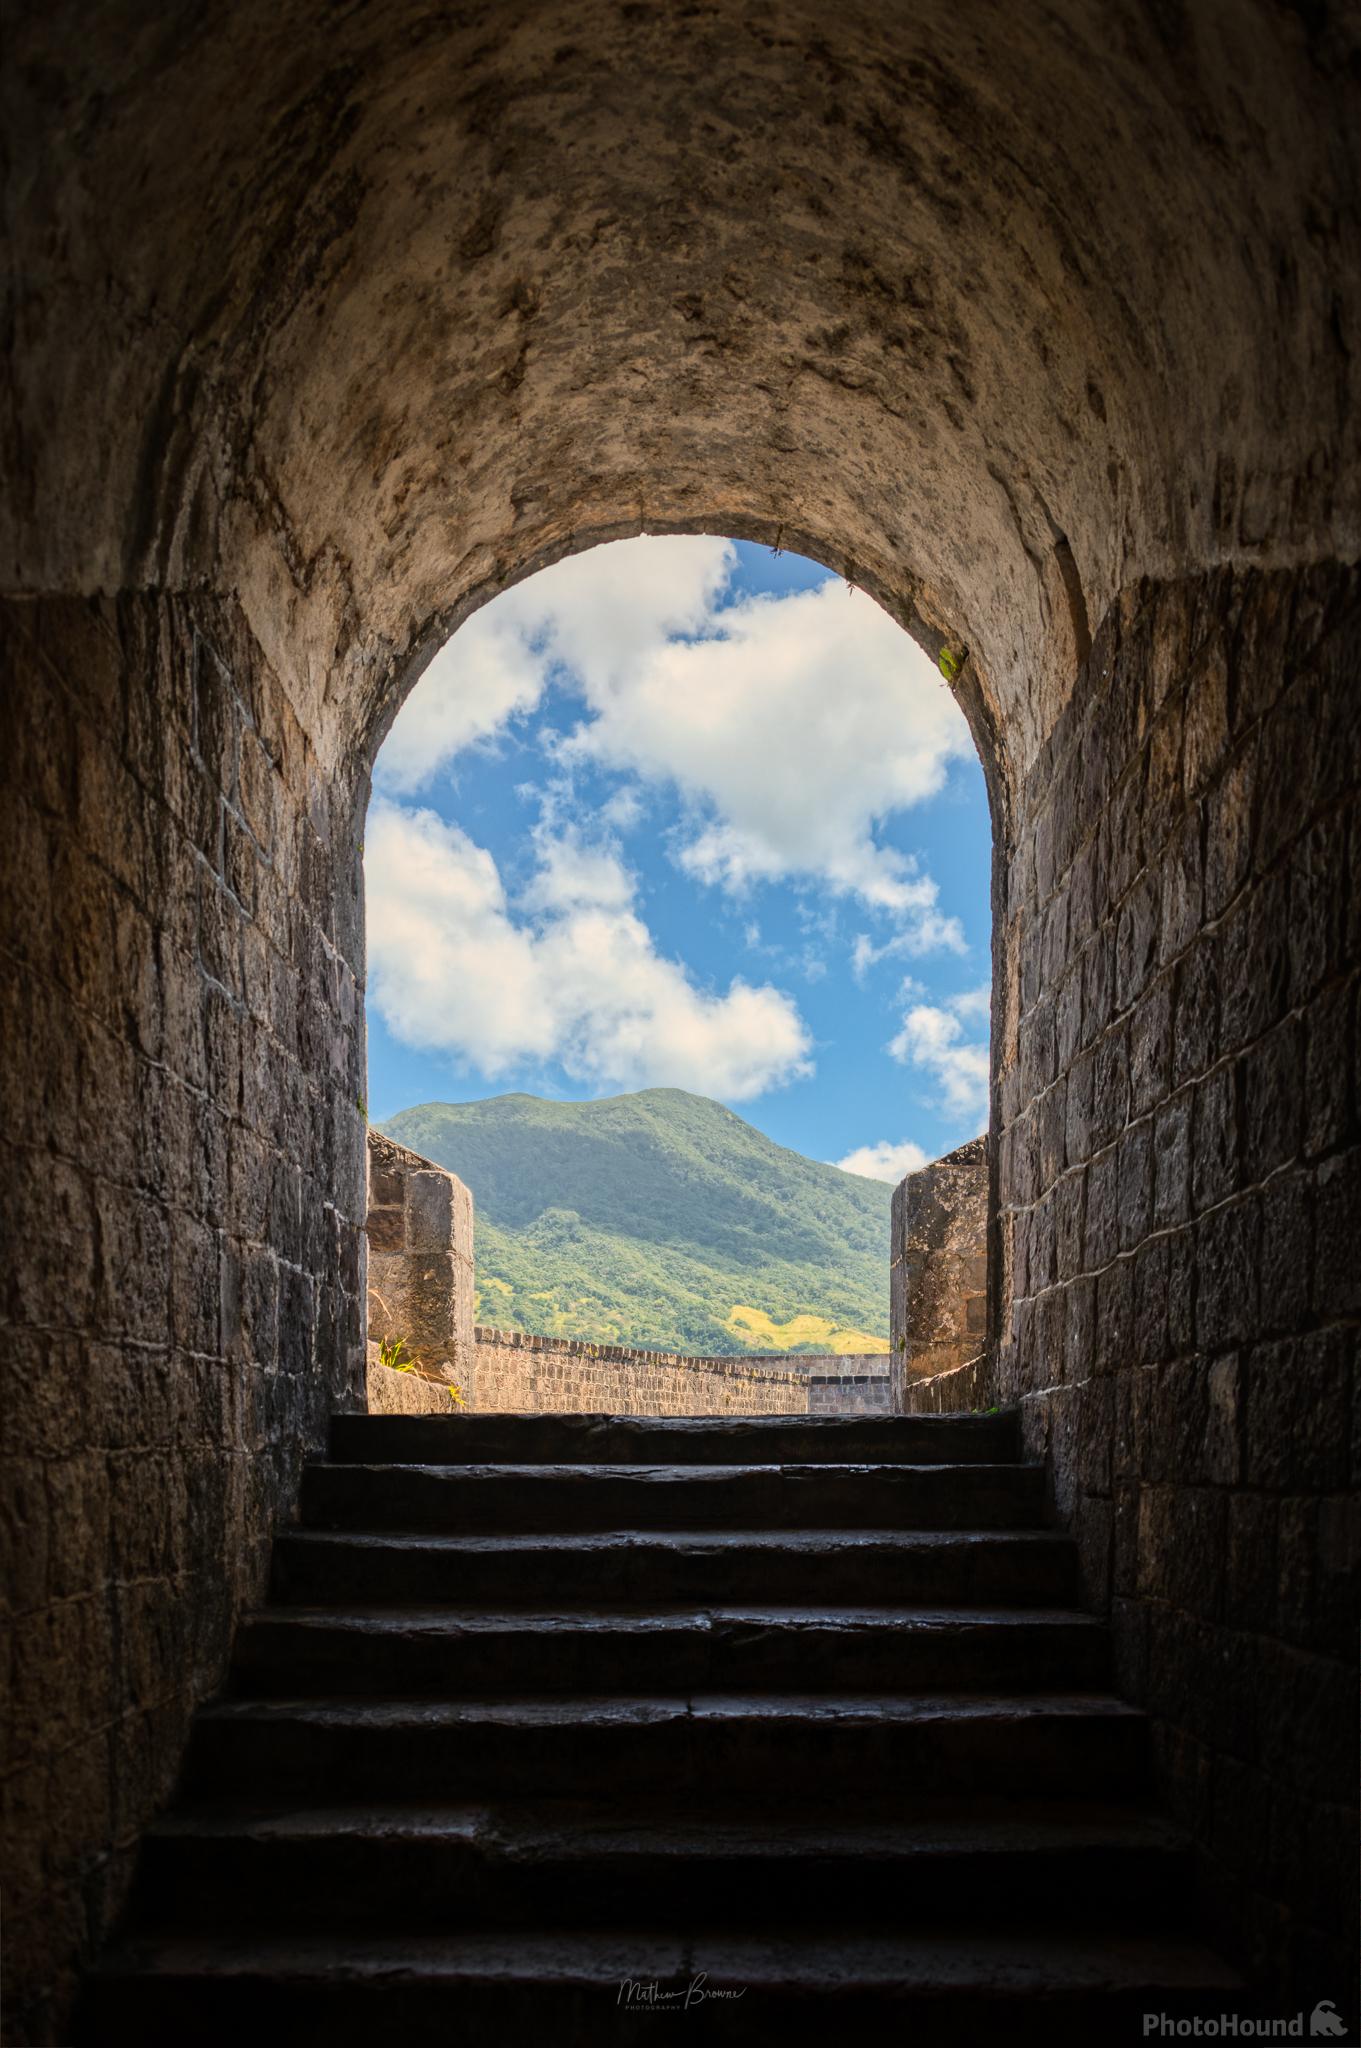 Saint Kitts and Nevis photo locations